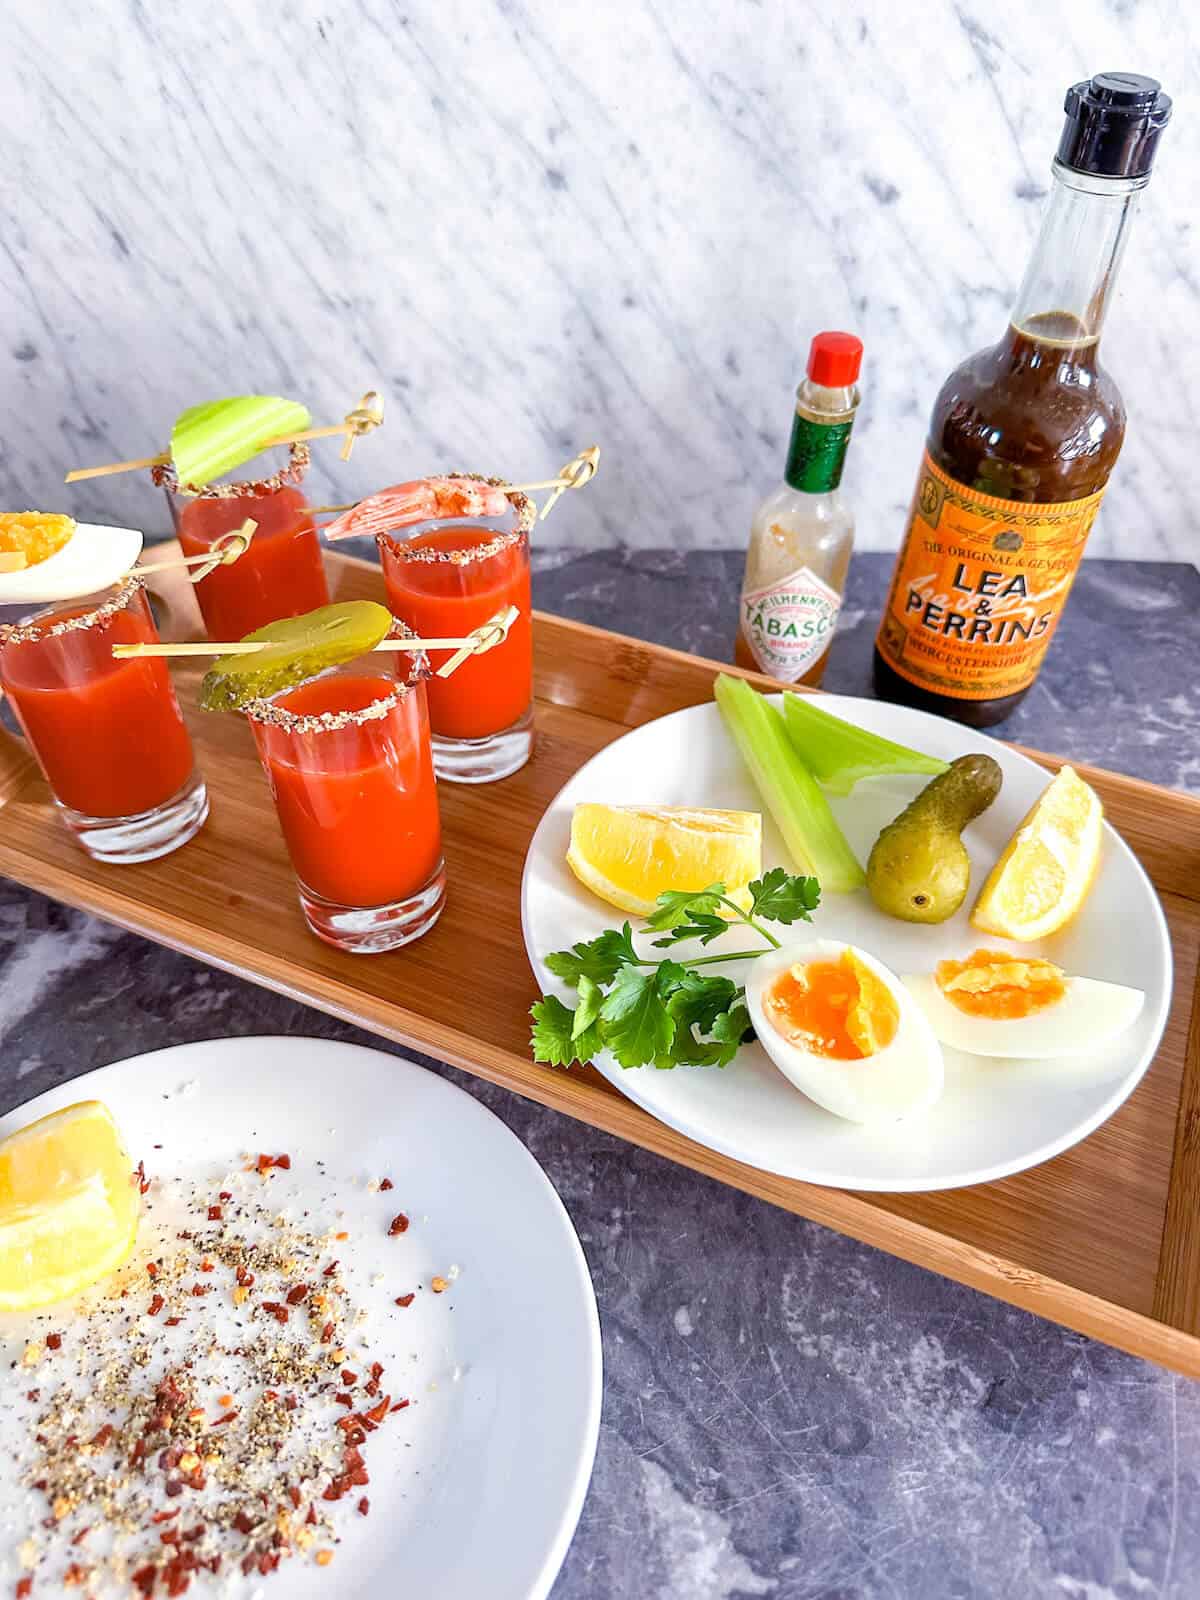 A tray of Bloody Mary amuse bouche shots next to a plate of garnishes, a bottle of Tabasco and a bottle of Worcestershire sauce.